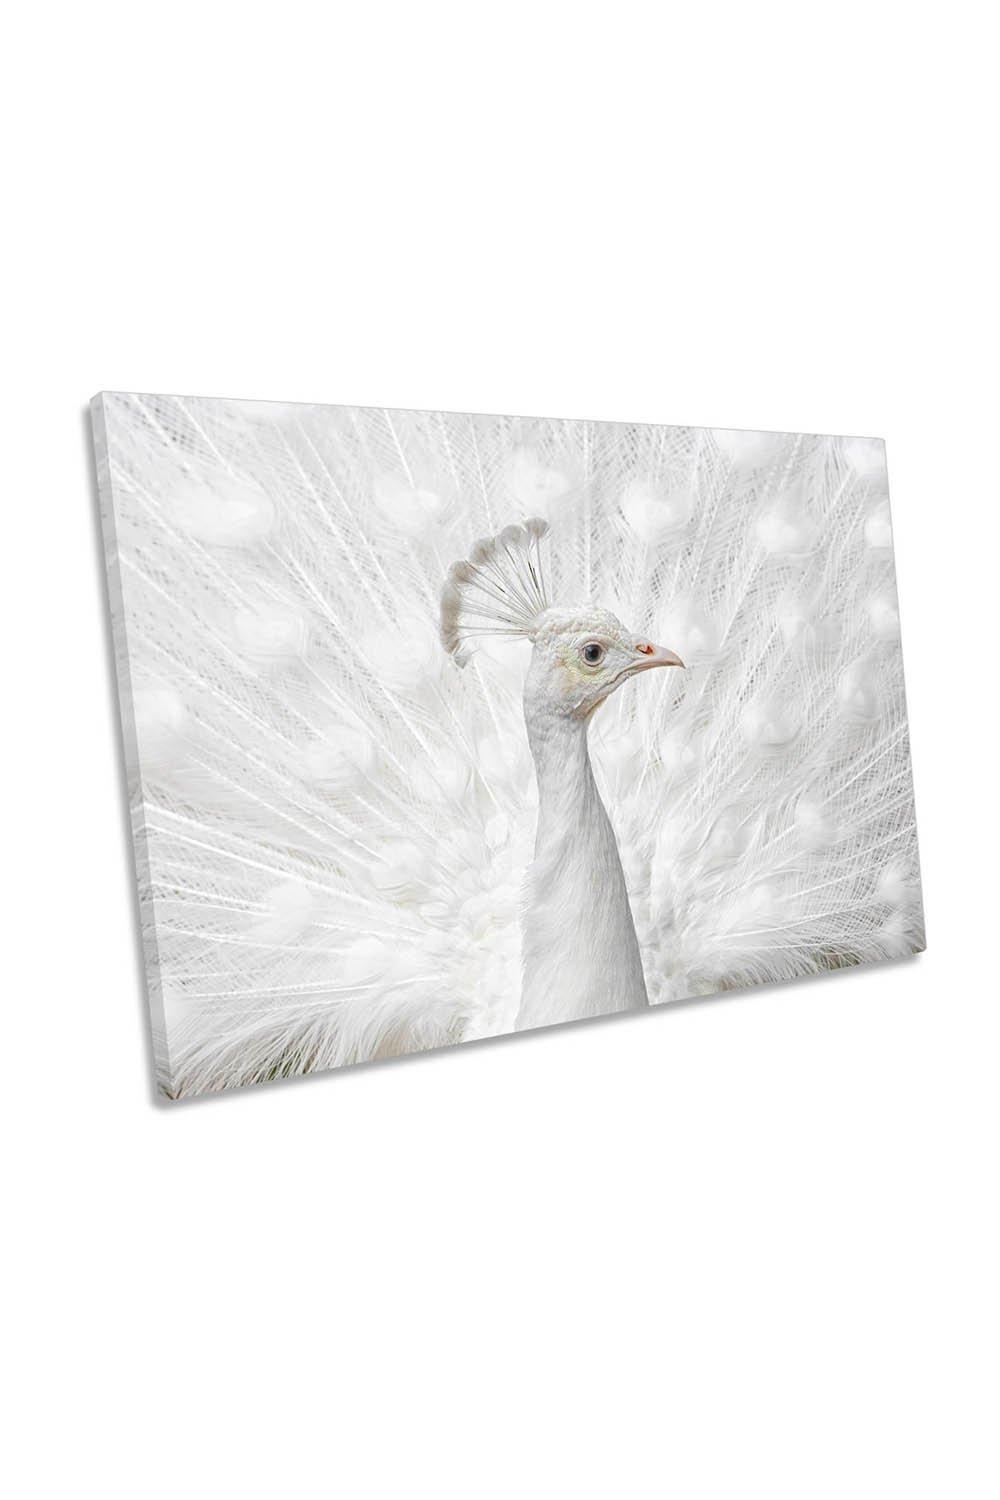 Immaculate White Peacock Feathers Canvas Wall Art Picture Print